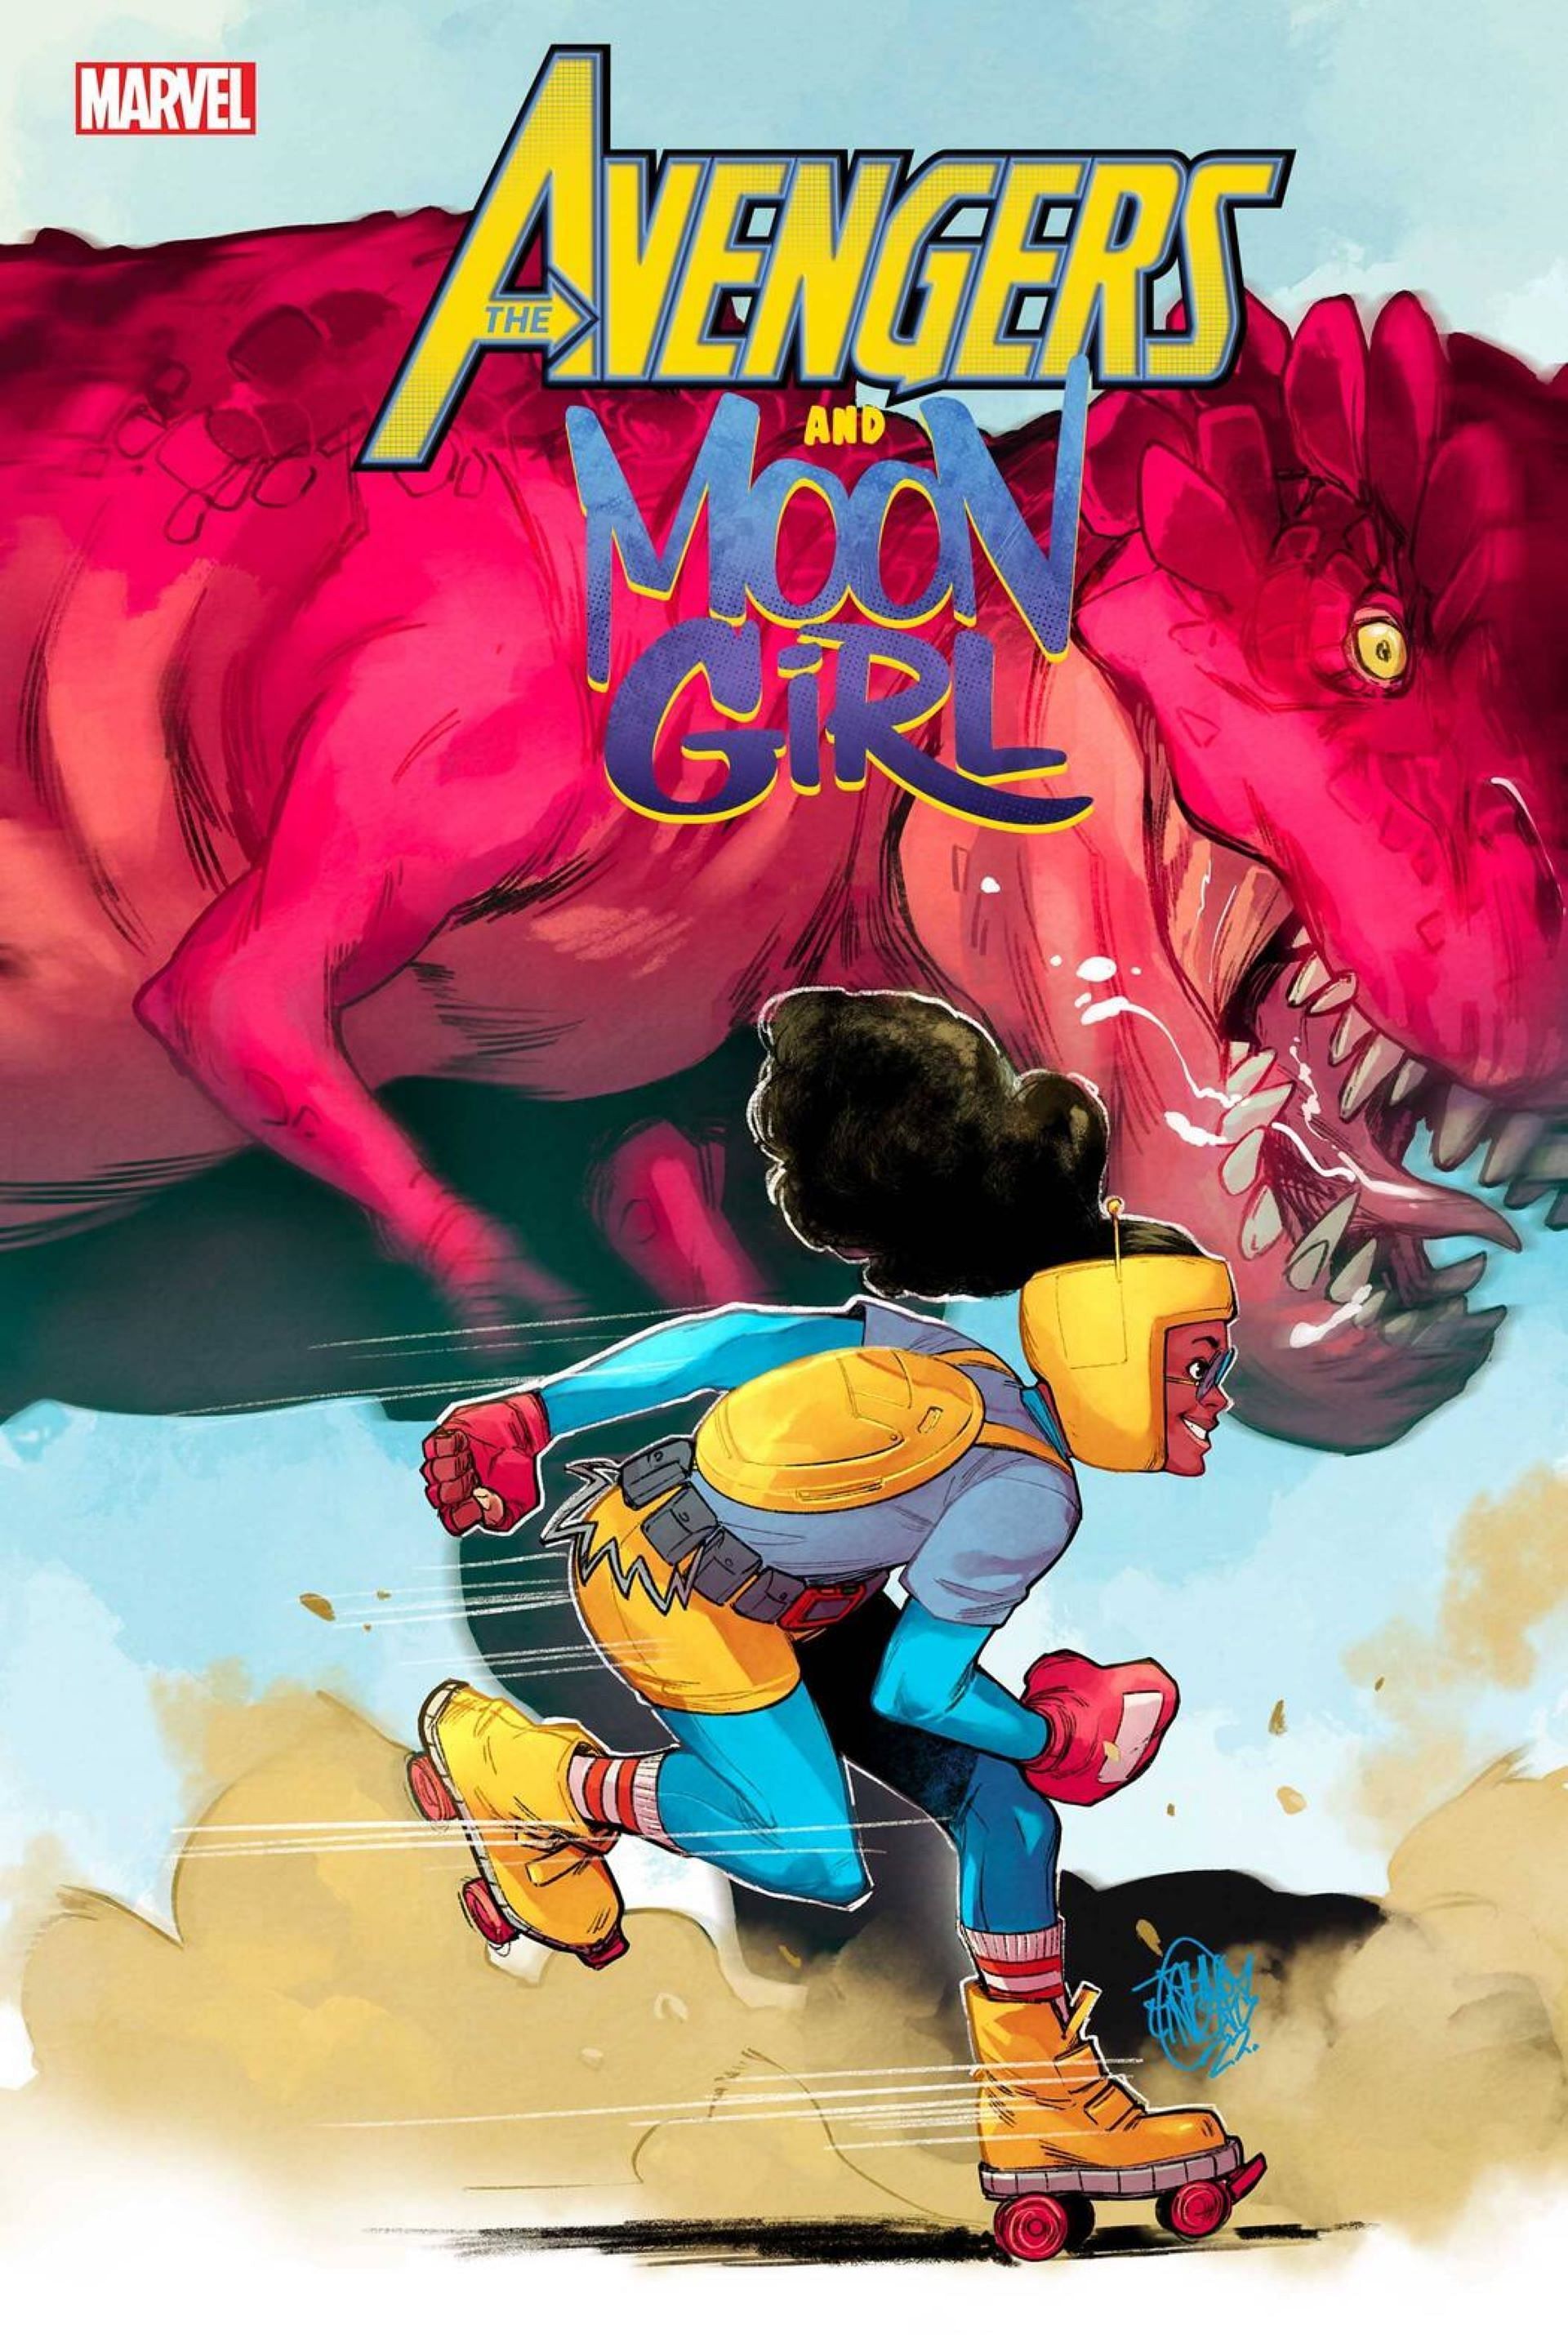 The young genius girl will protect the world in the upcoming comic (Image via Marvel)